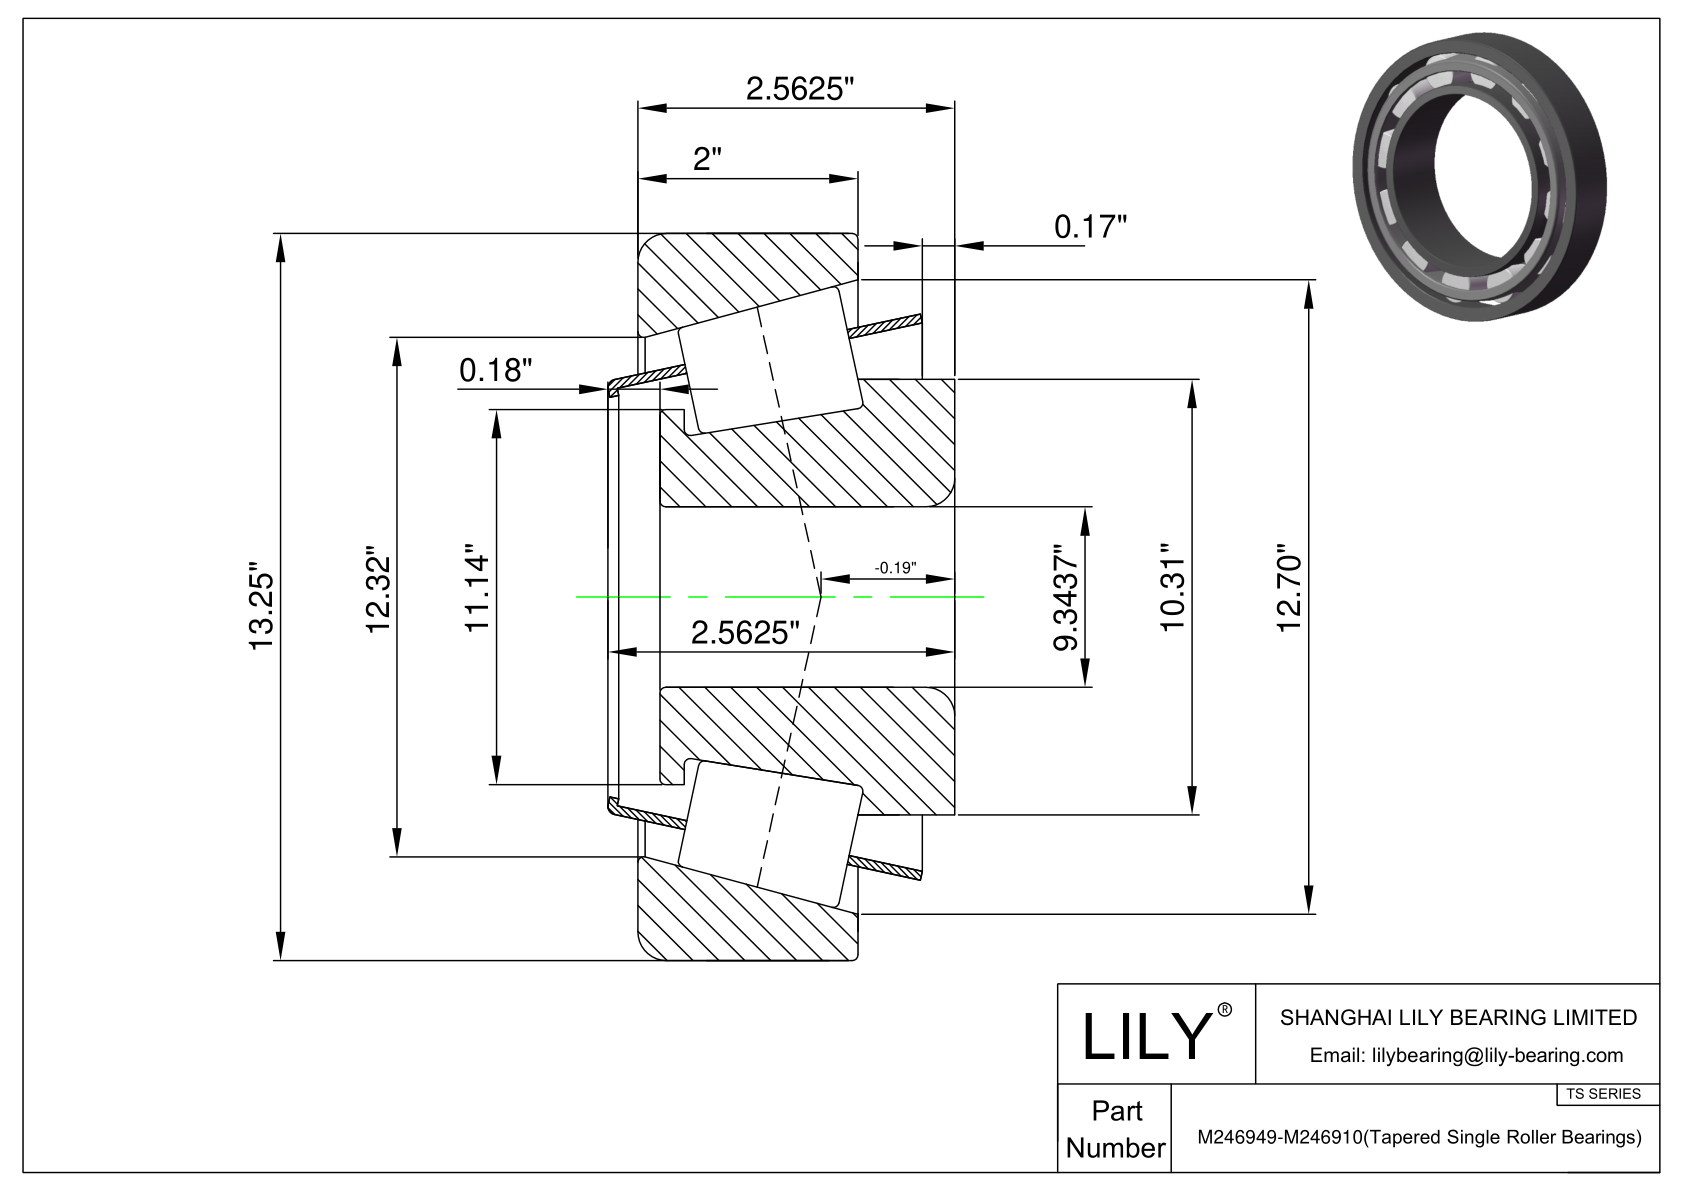 M246949-M246910 TS (Tapered Single Roller Bearings) (Imperial) cad drawing